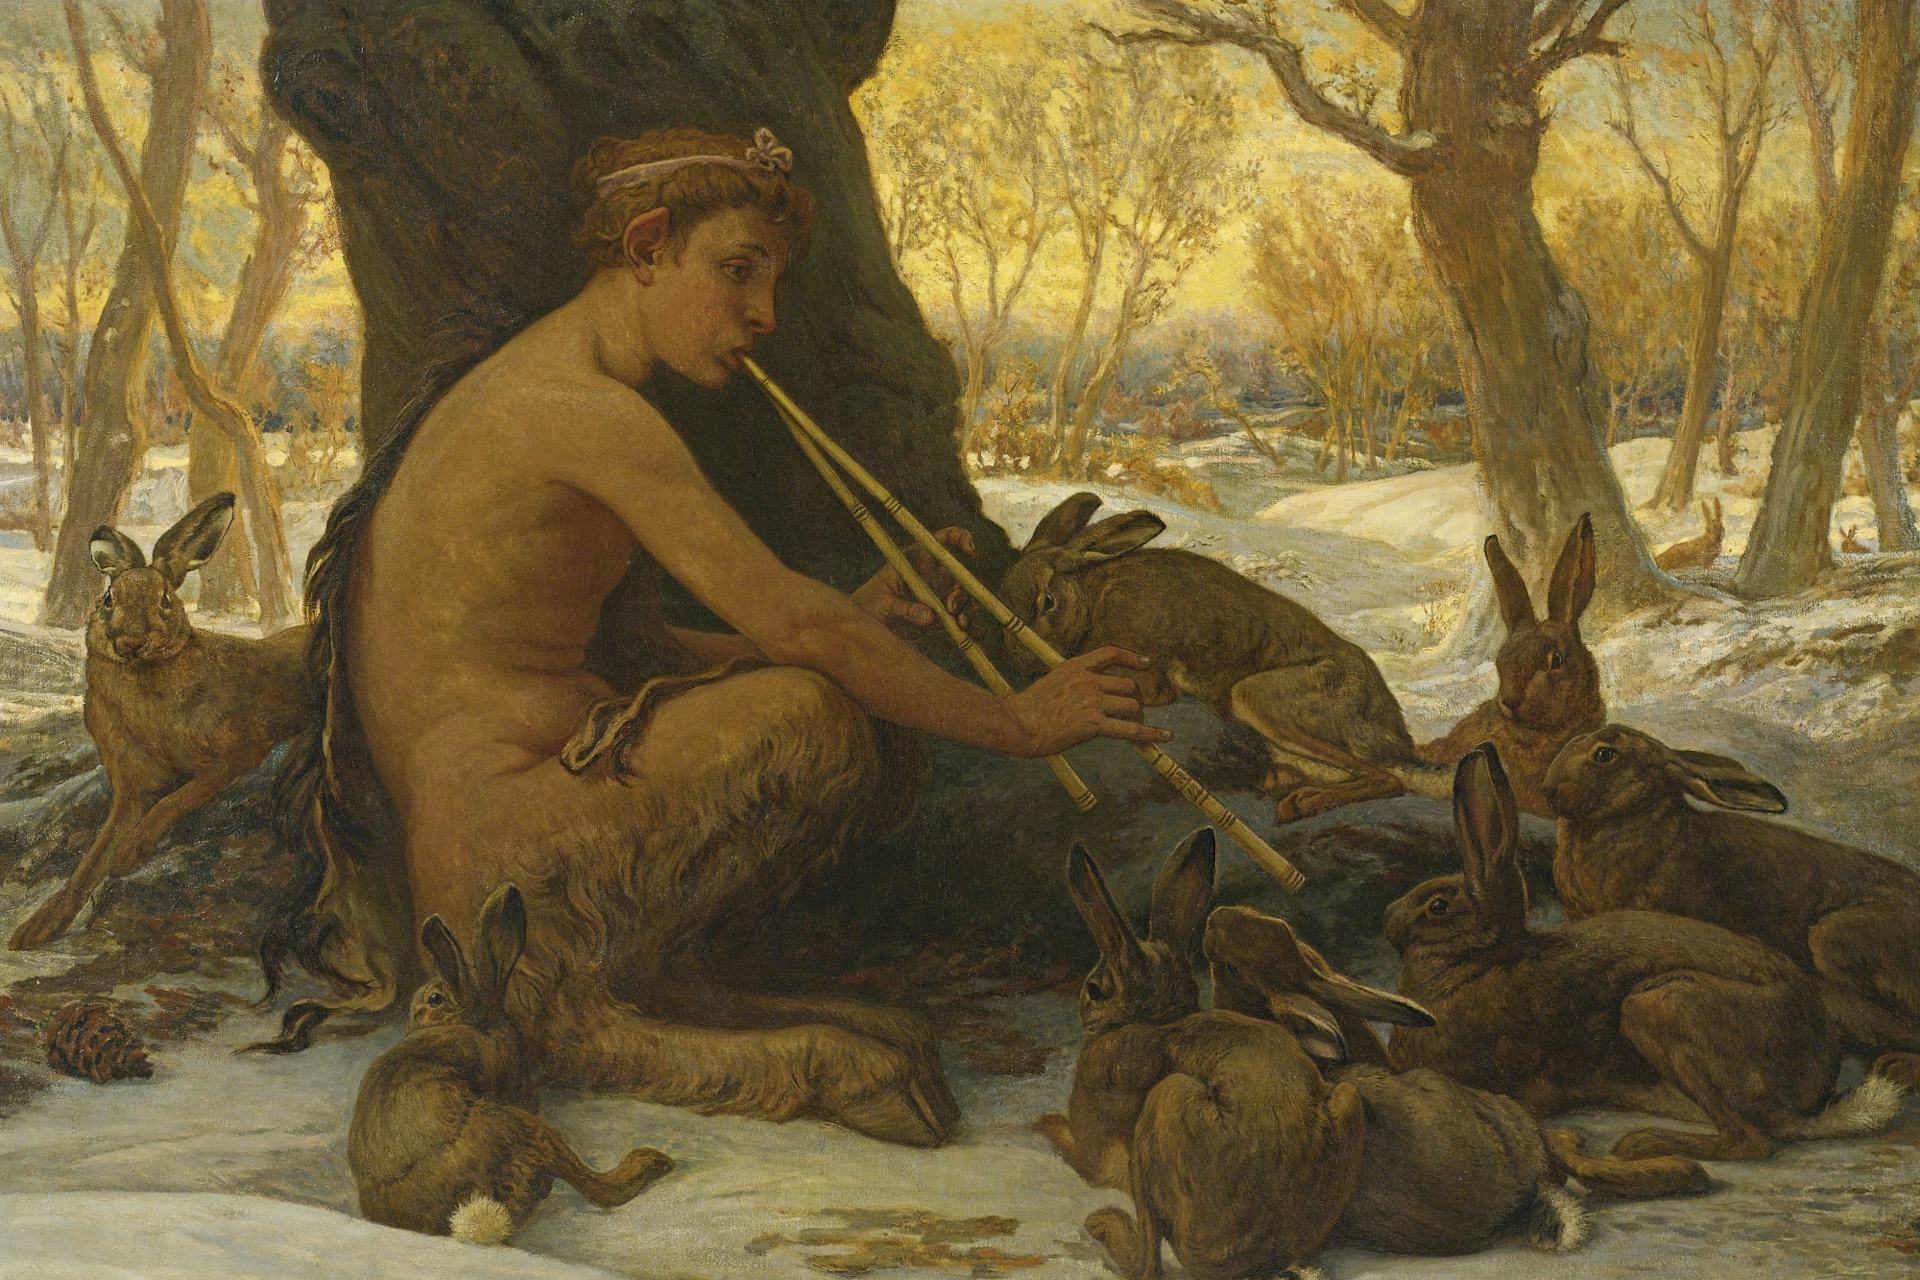 The Young Marsyas Charming the Hares by Elihu Vedder (1878)